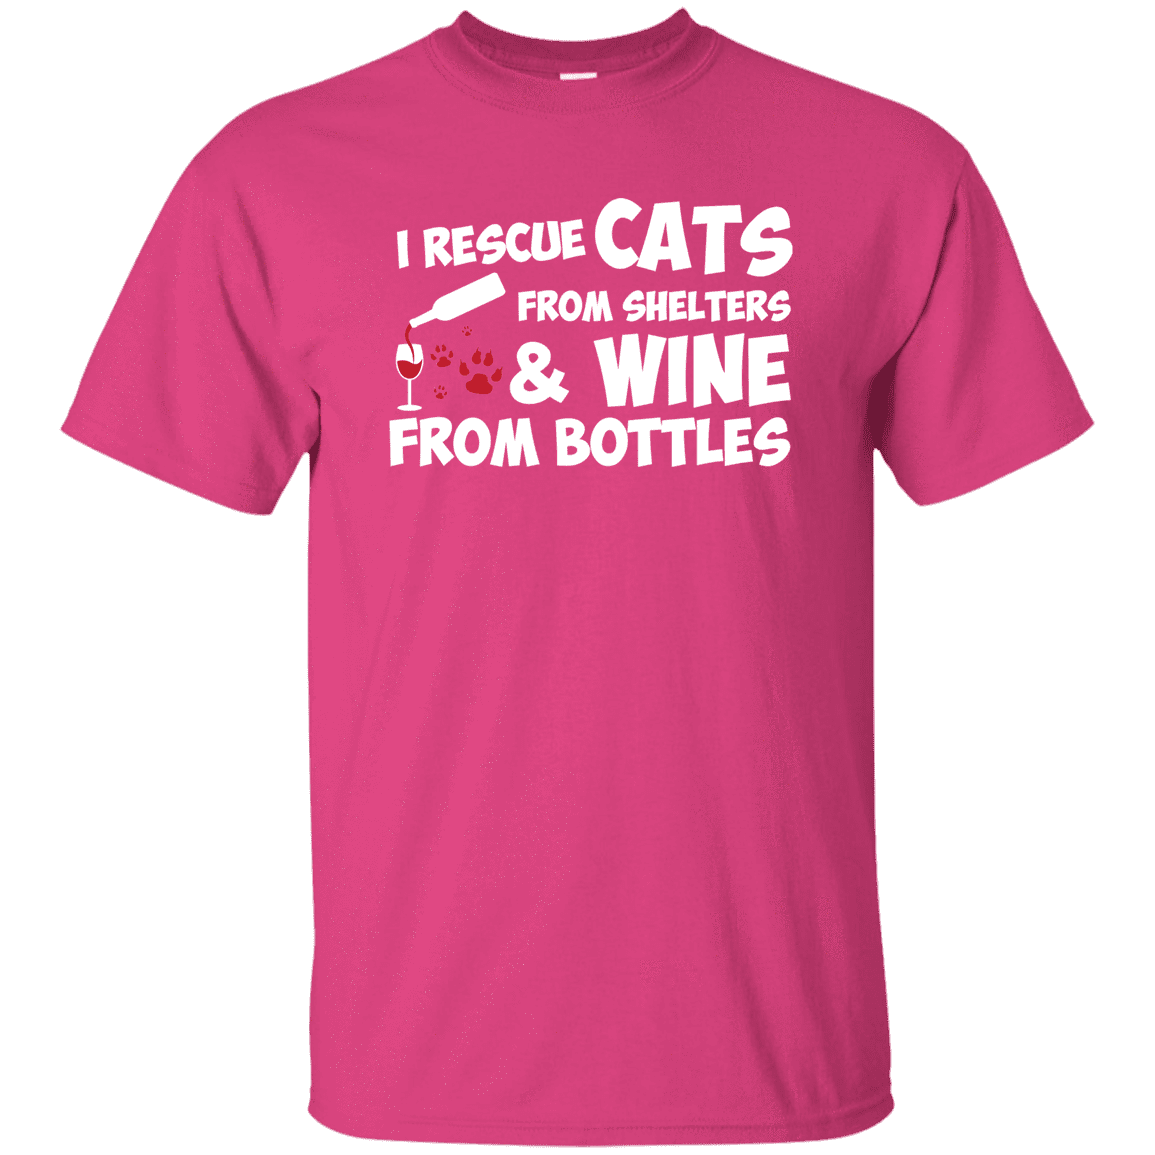 I Rescue Cats And Wine - T Shirt.